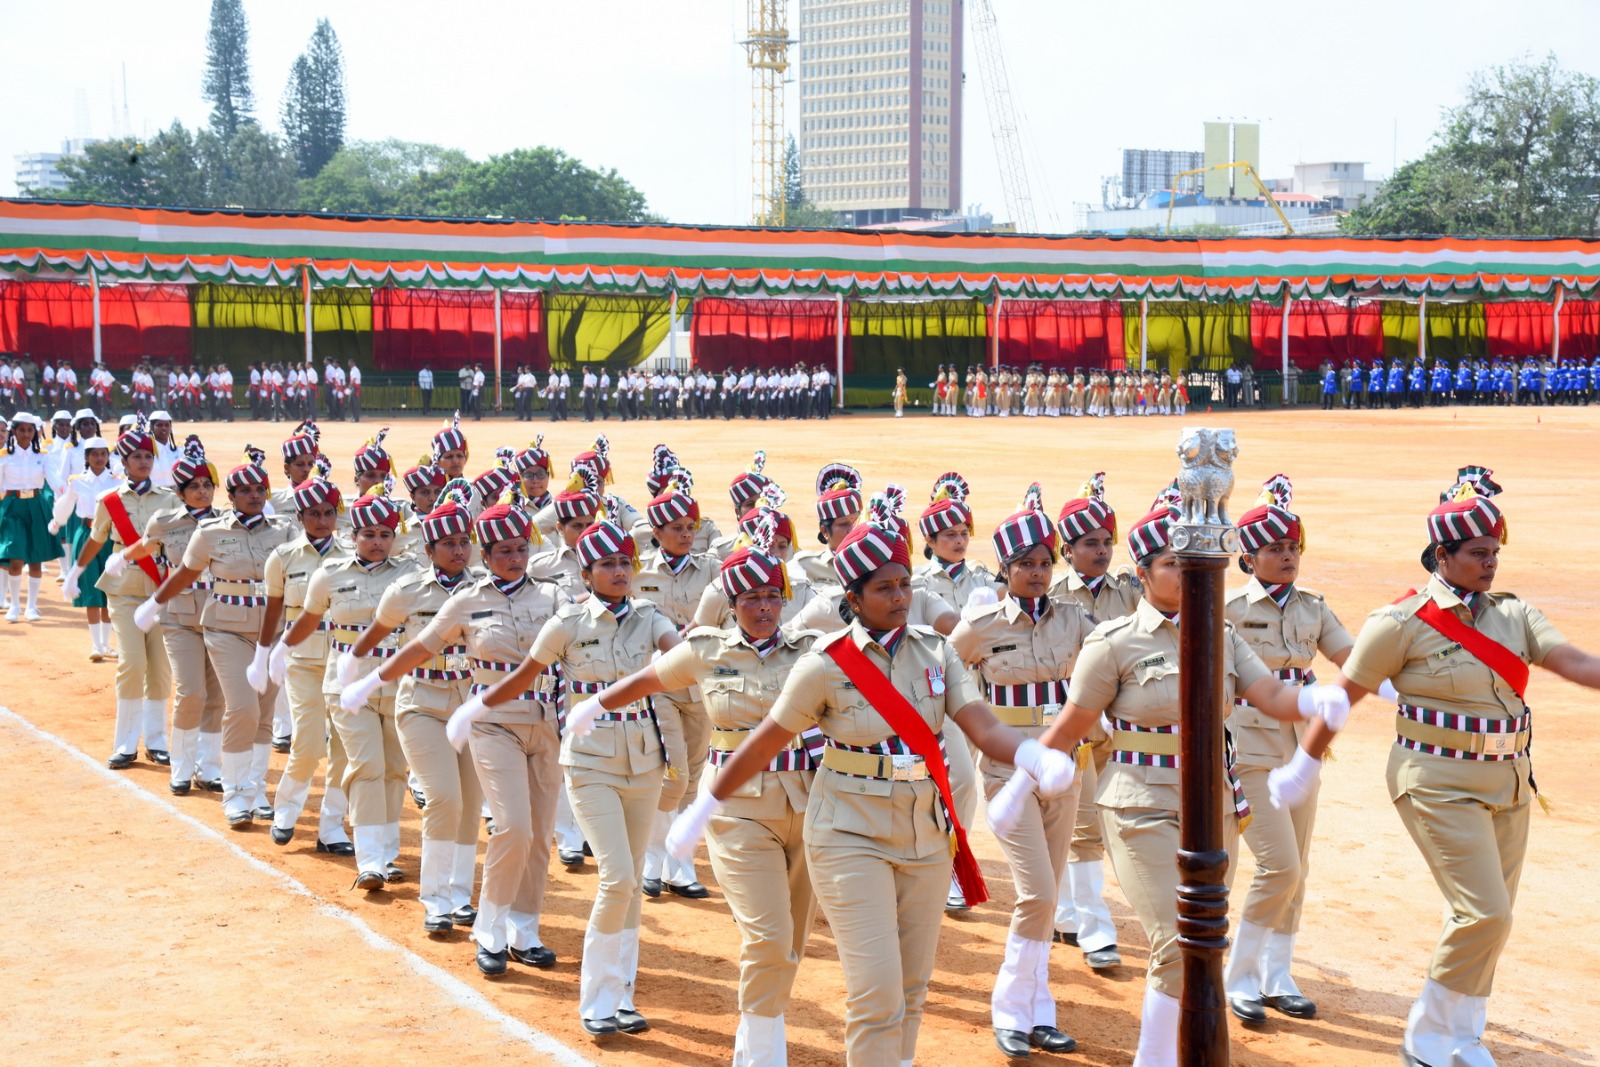 manik-shah-parade-ground-is-ready-for-independence-day-says-tushar-girinath